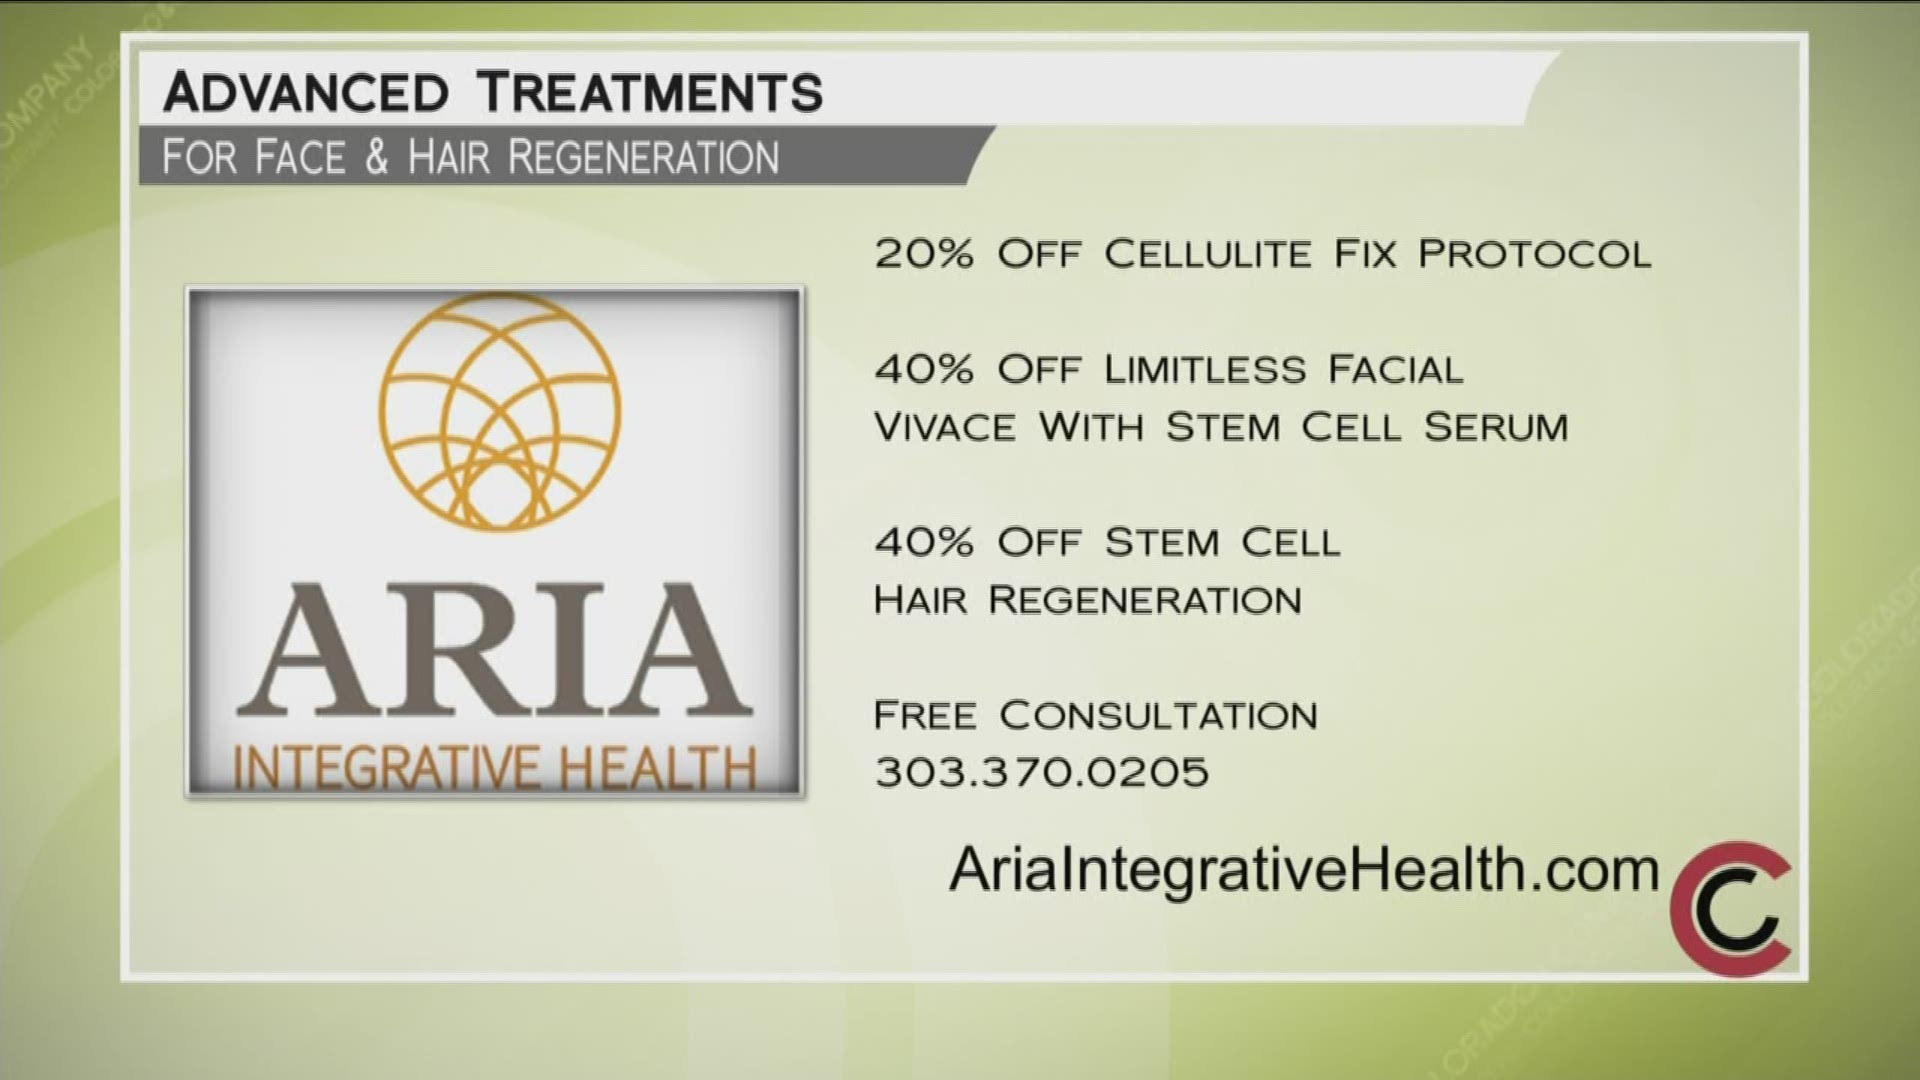 Enjoy special pricing on treatments now at Aria Integrative Health. Call 303.370.0205 to find out how much you can save. Learn more at www.AriaIntegrativeHealth.com.